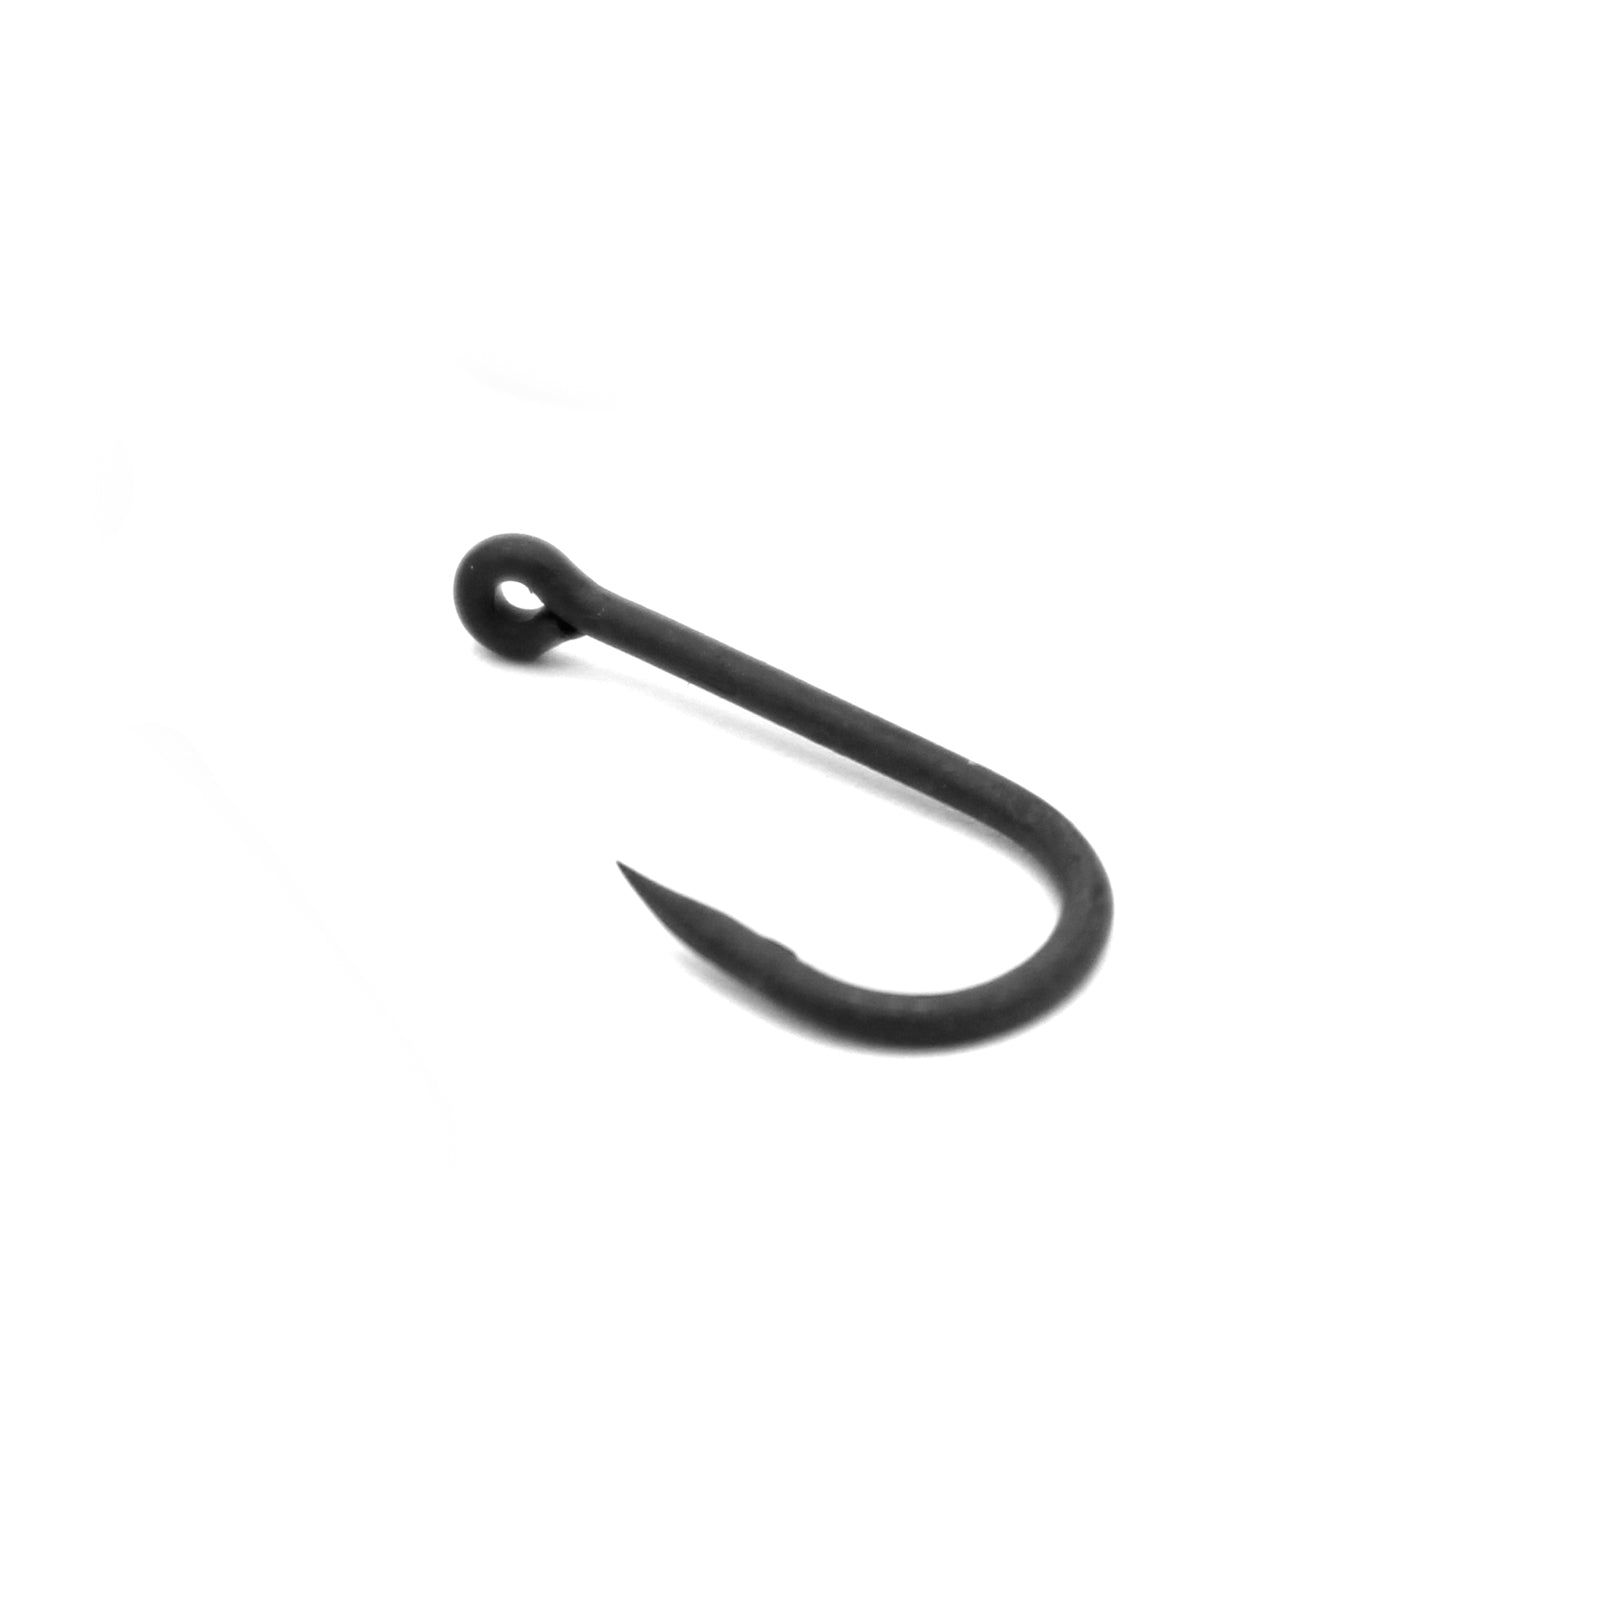 Deception Angling TWG Micro Barbed Fishing Hook